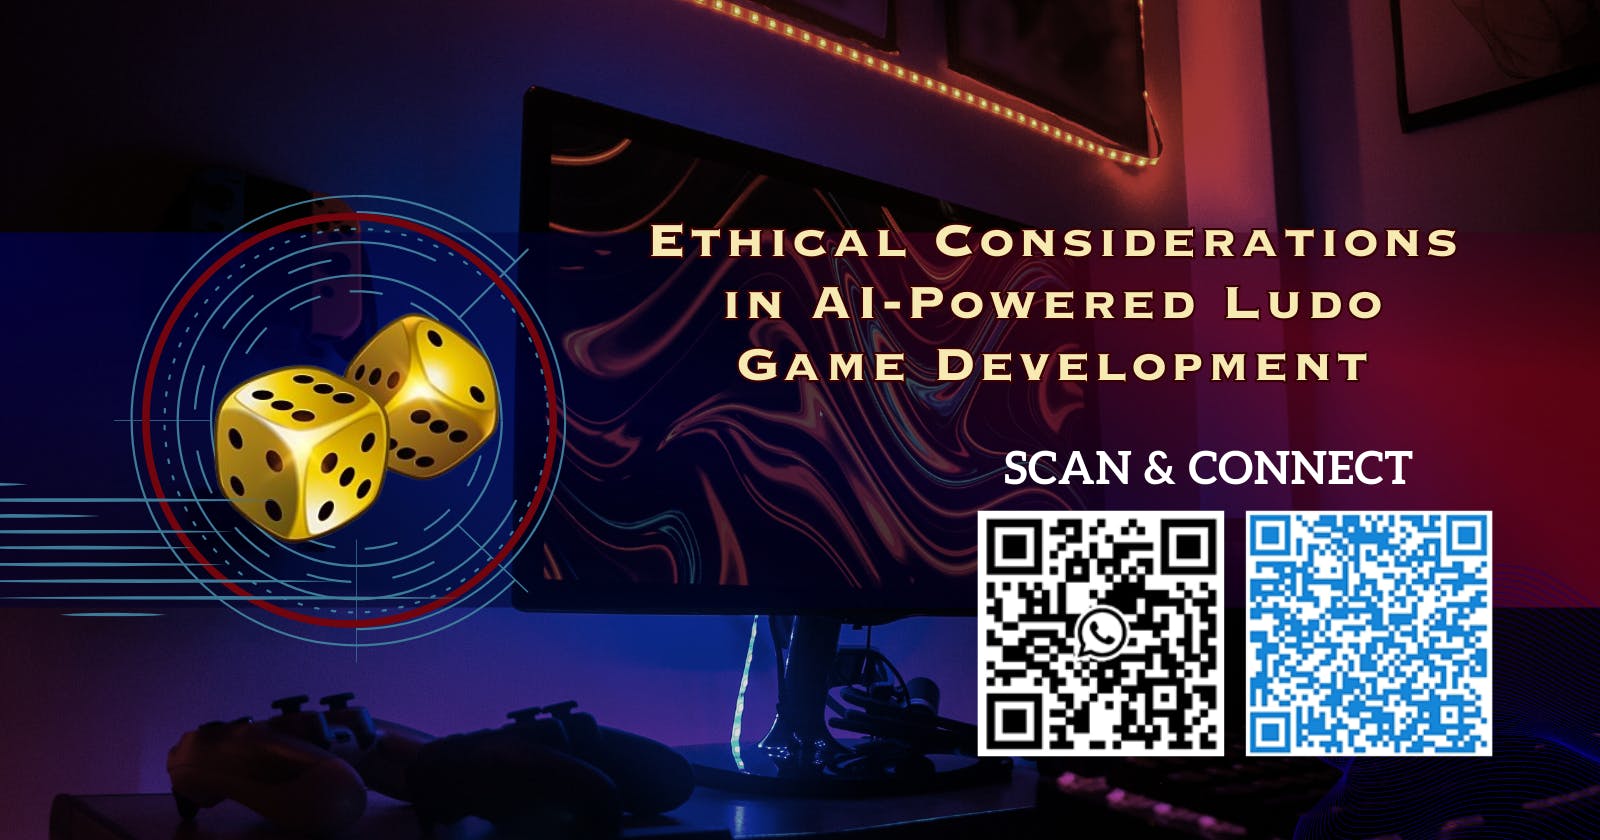 Ethical Considerations in AI-Powered Ludo Game Development